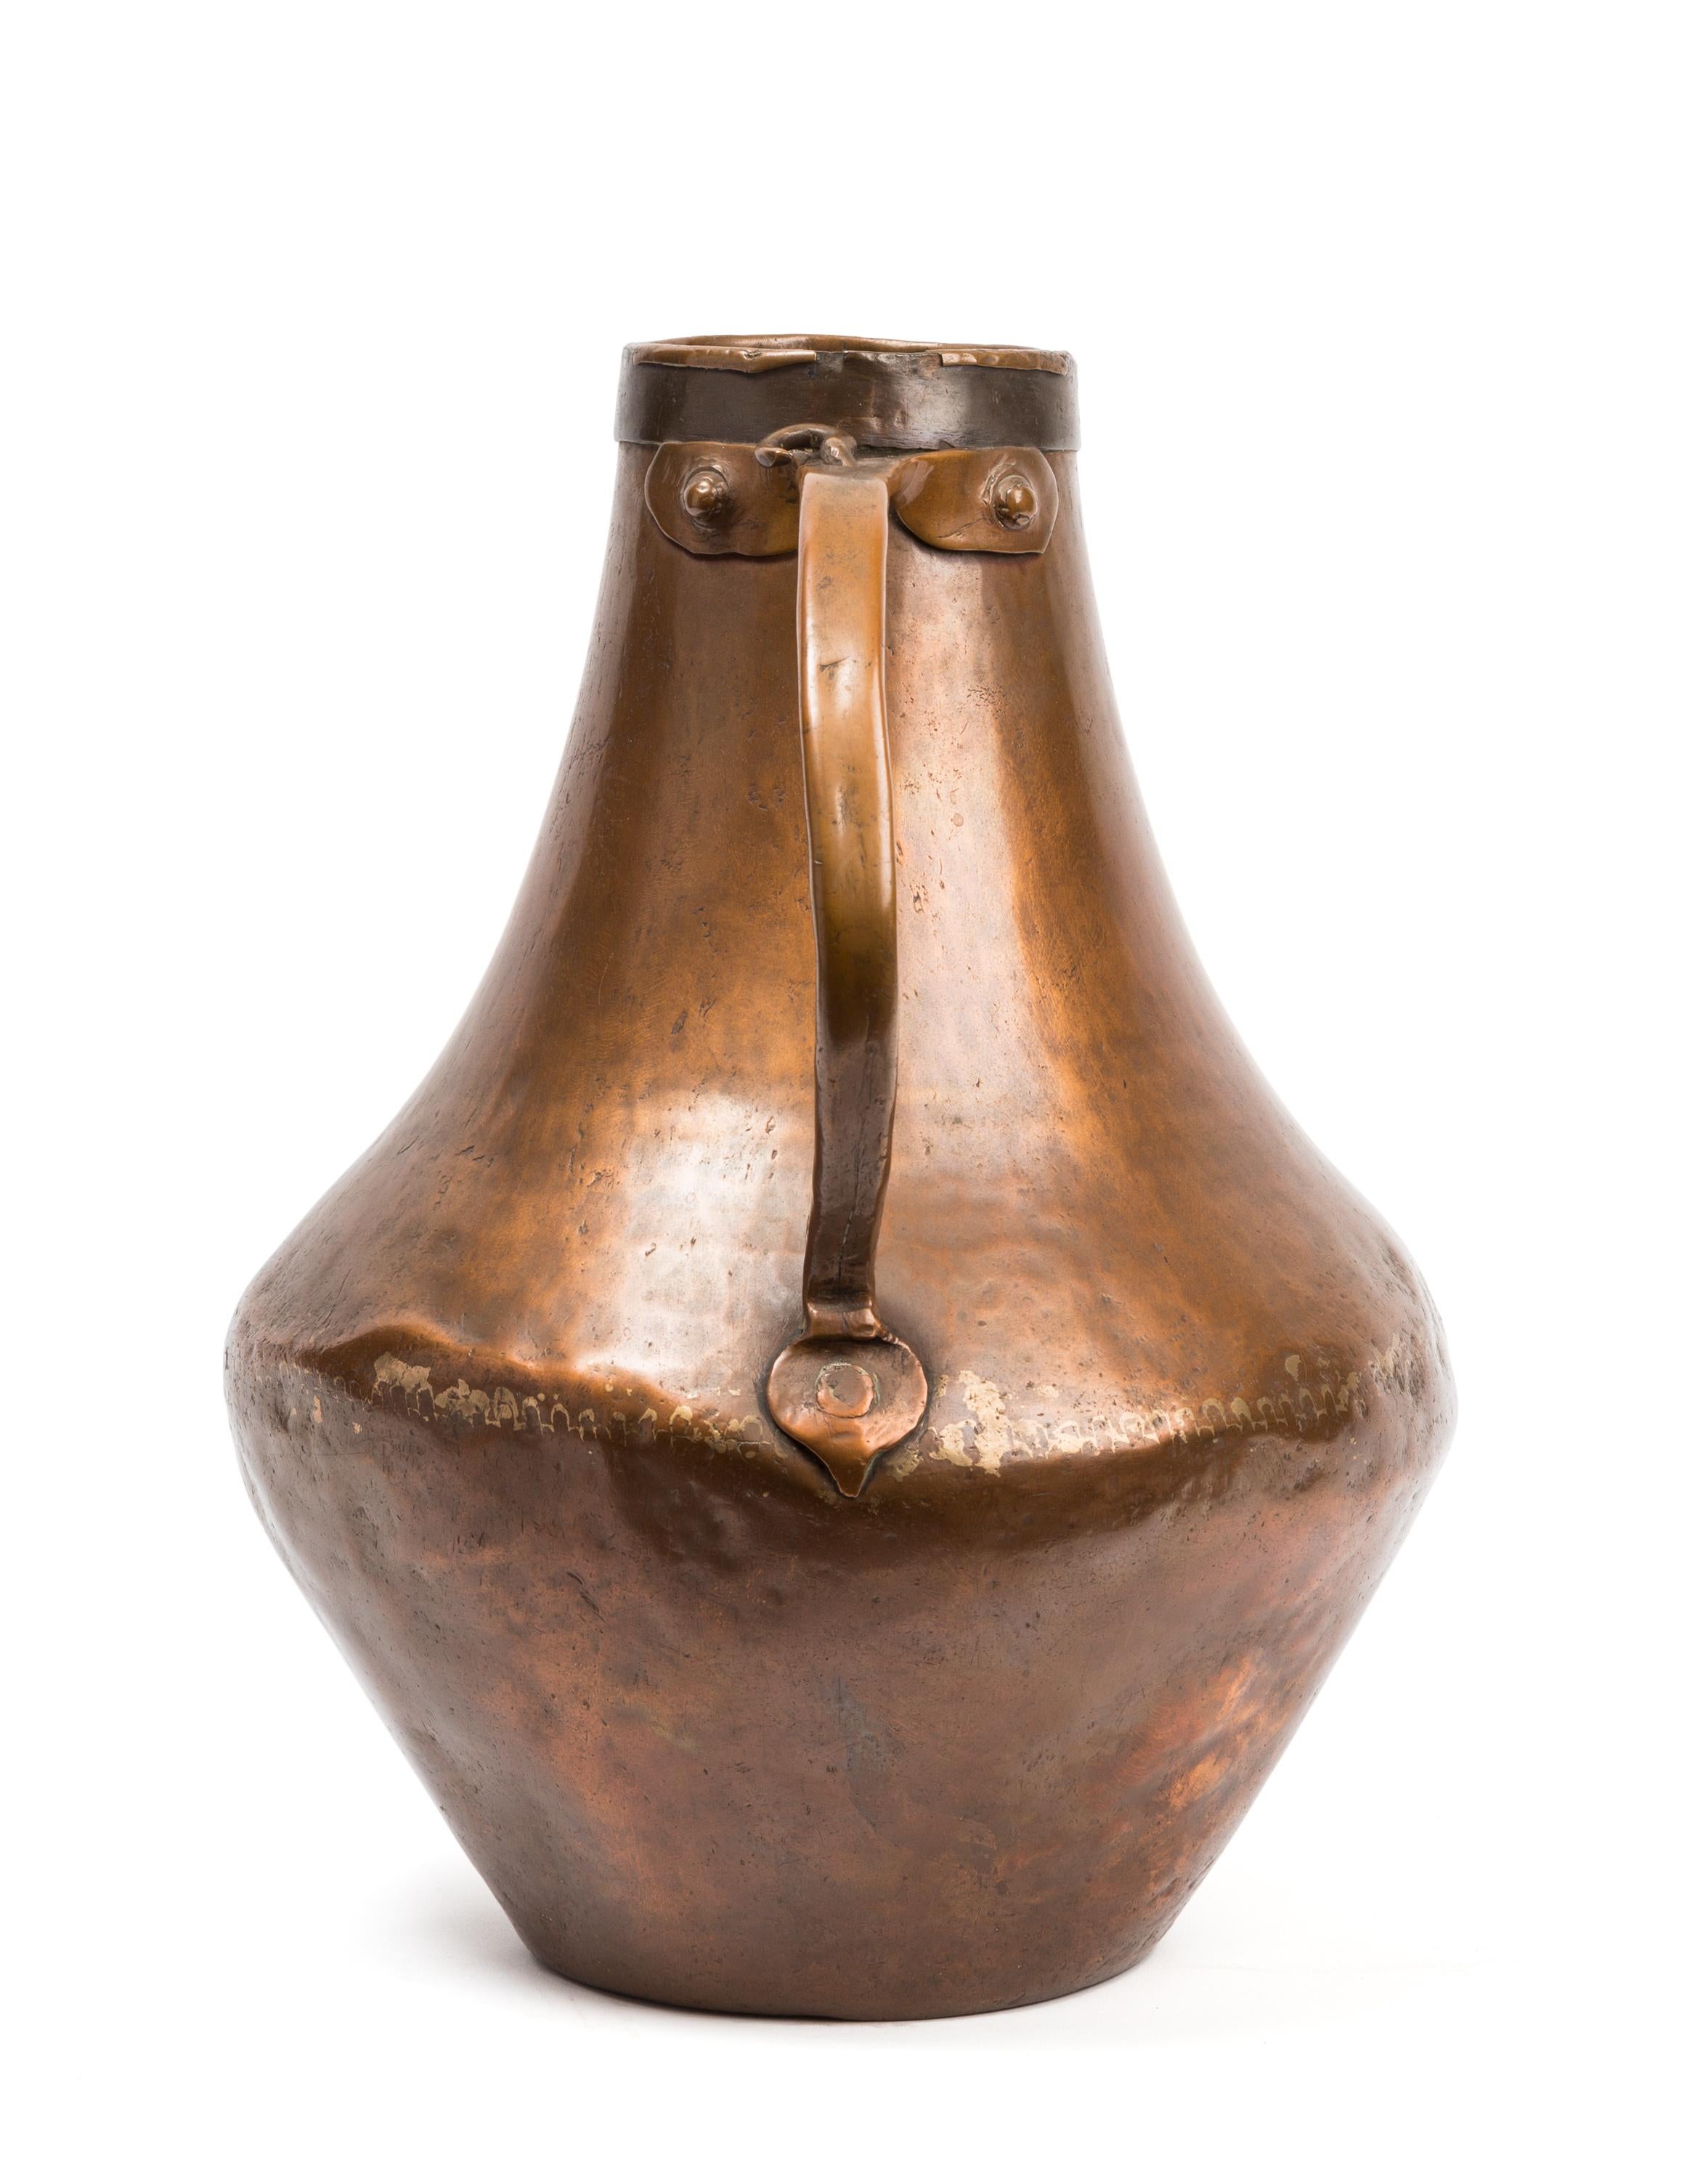 Hammered, riveted and soldered in 18th century Spain, this copper container was made for common household use, but with its sculptural form, rich color and patina of age it surpasses its rough beginnings to become a thing of beauty. The handle is